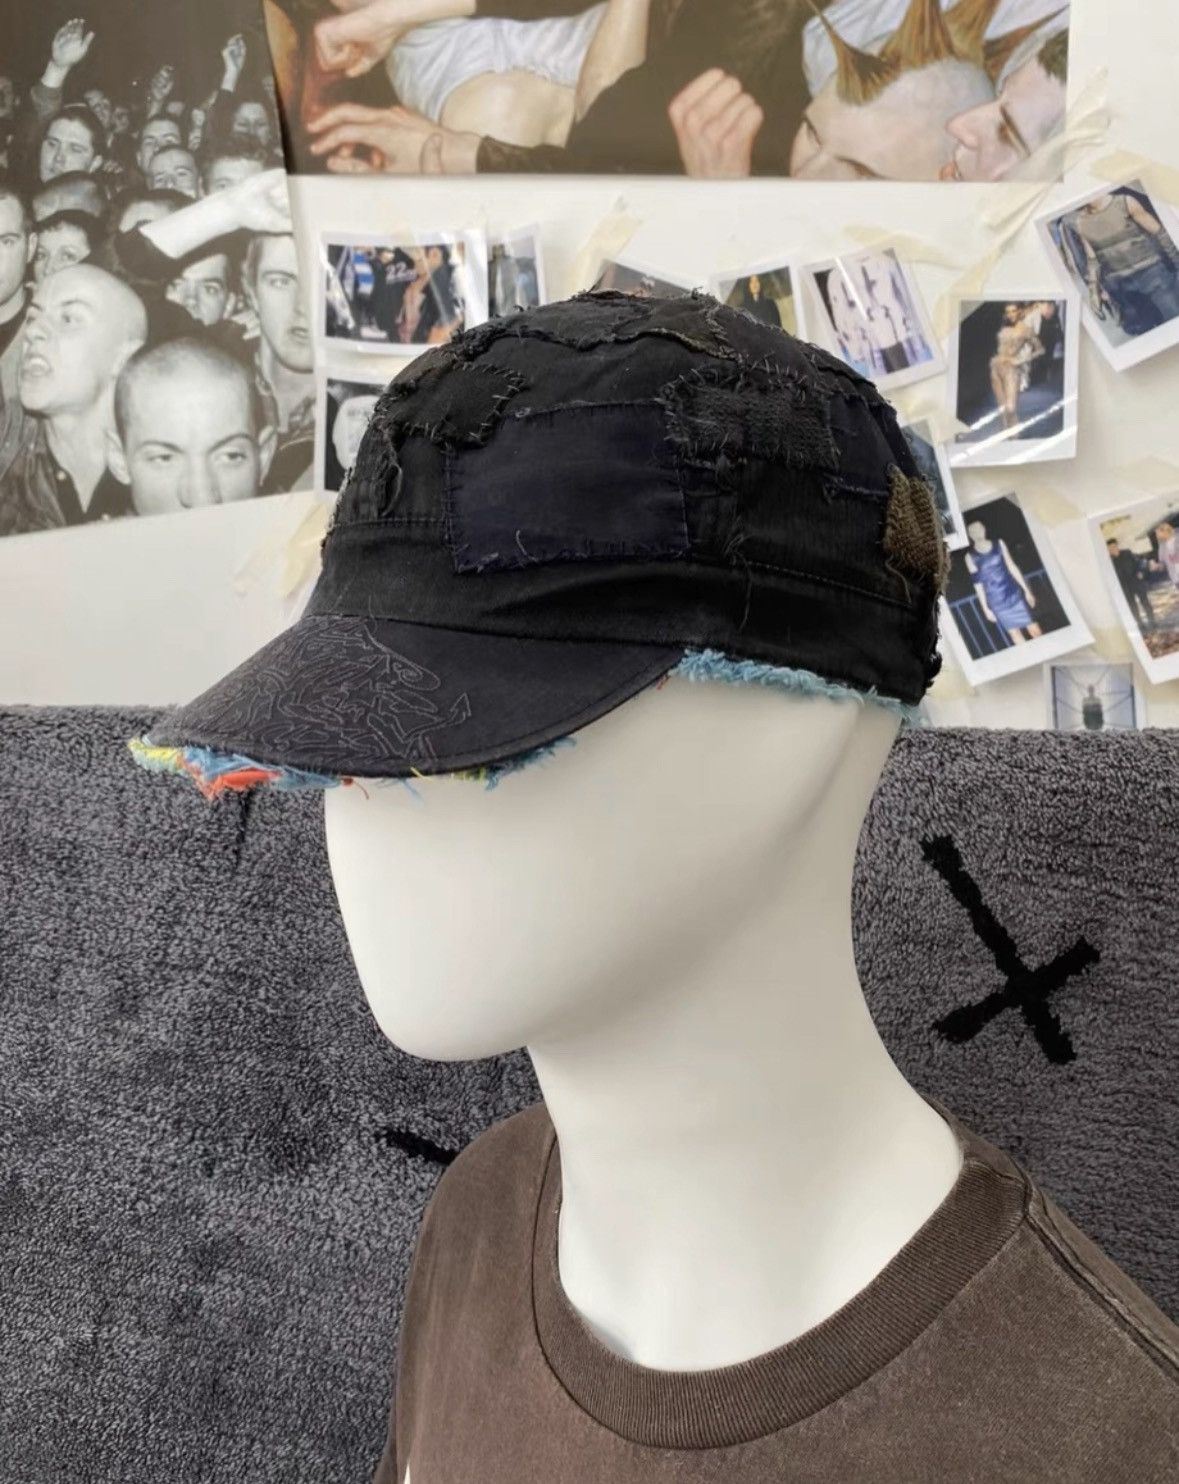 Undercover Undercover SS03 “Scab” path hat | Grailed